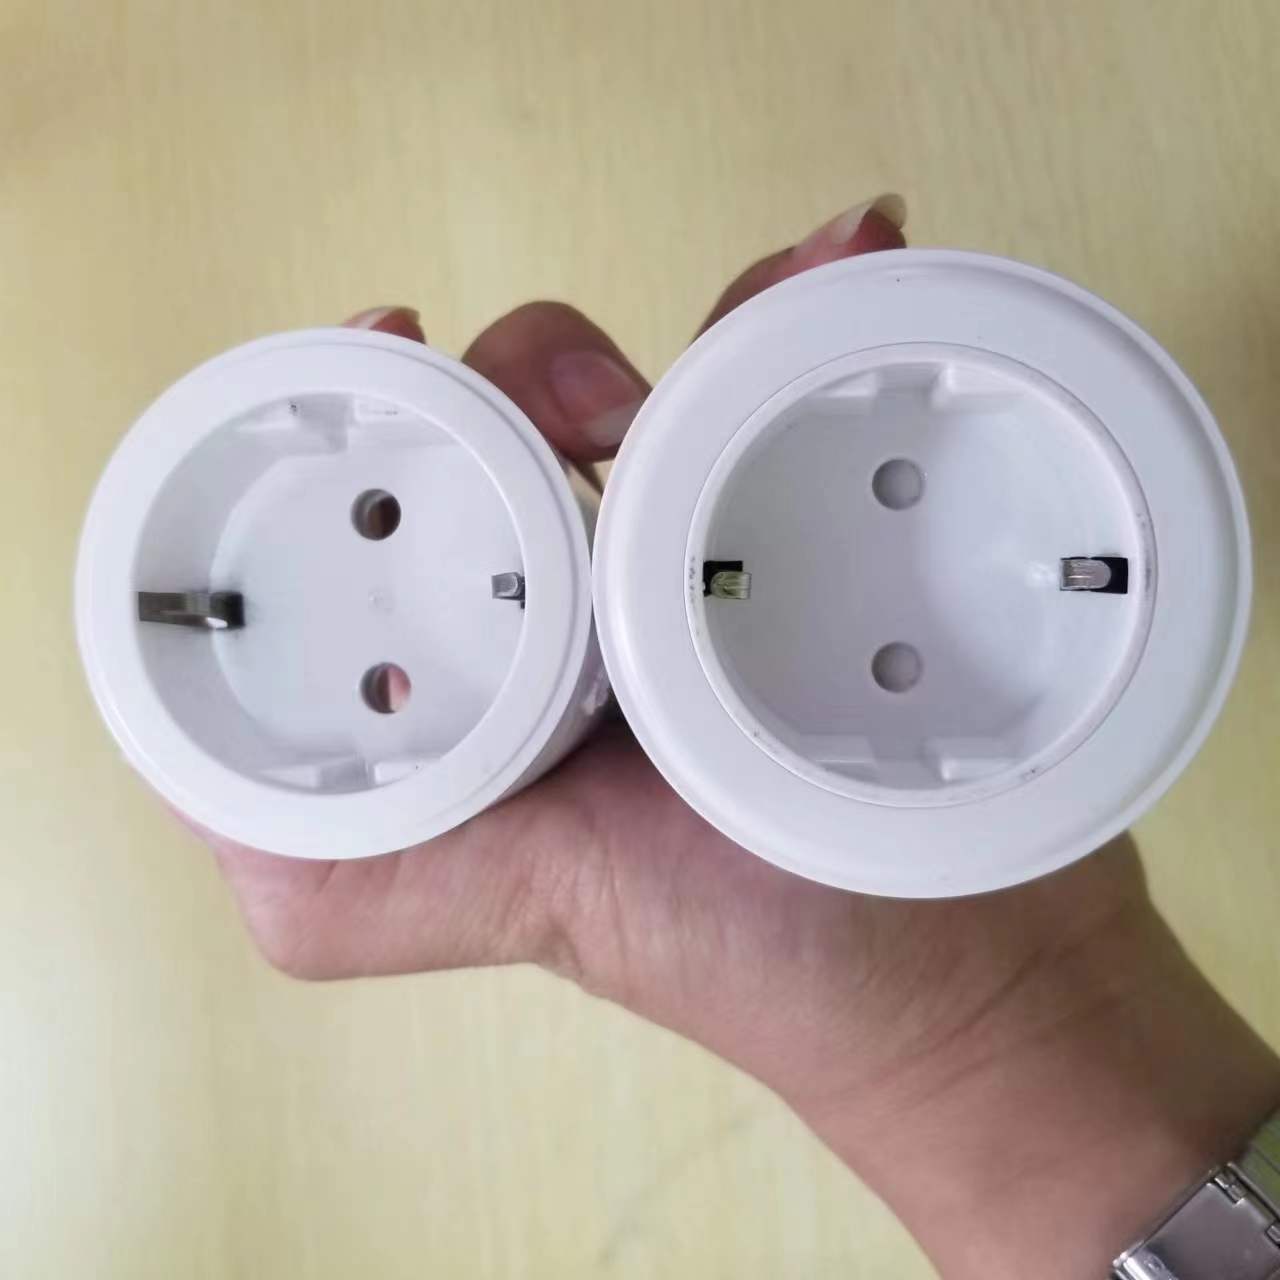 https://www.simatoper.com/simatop-smart-plug-m6-10a-smart-home-wi-fi-outlet-ul-certified-2-4g-wifi-only-product/